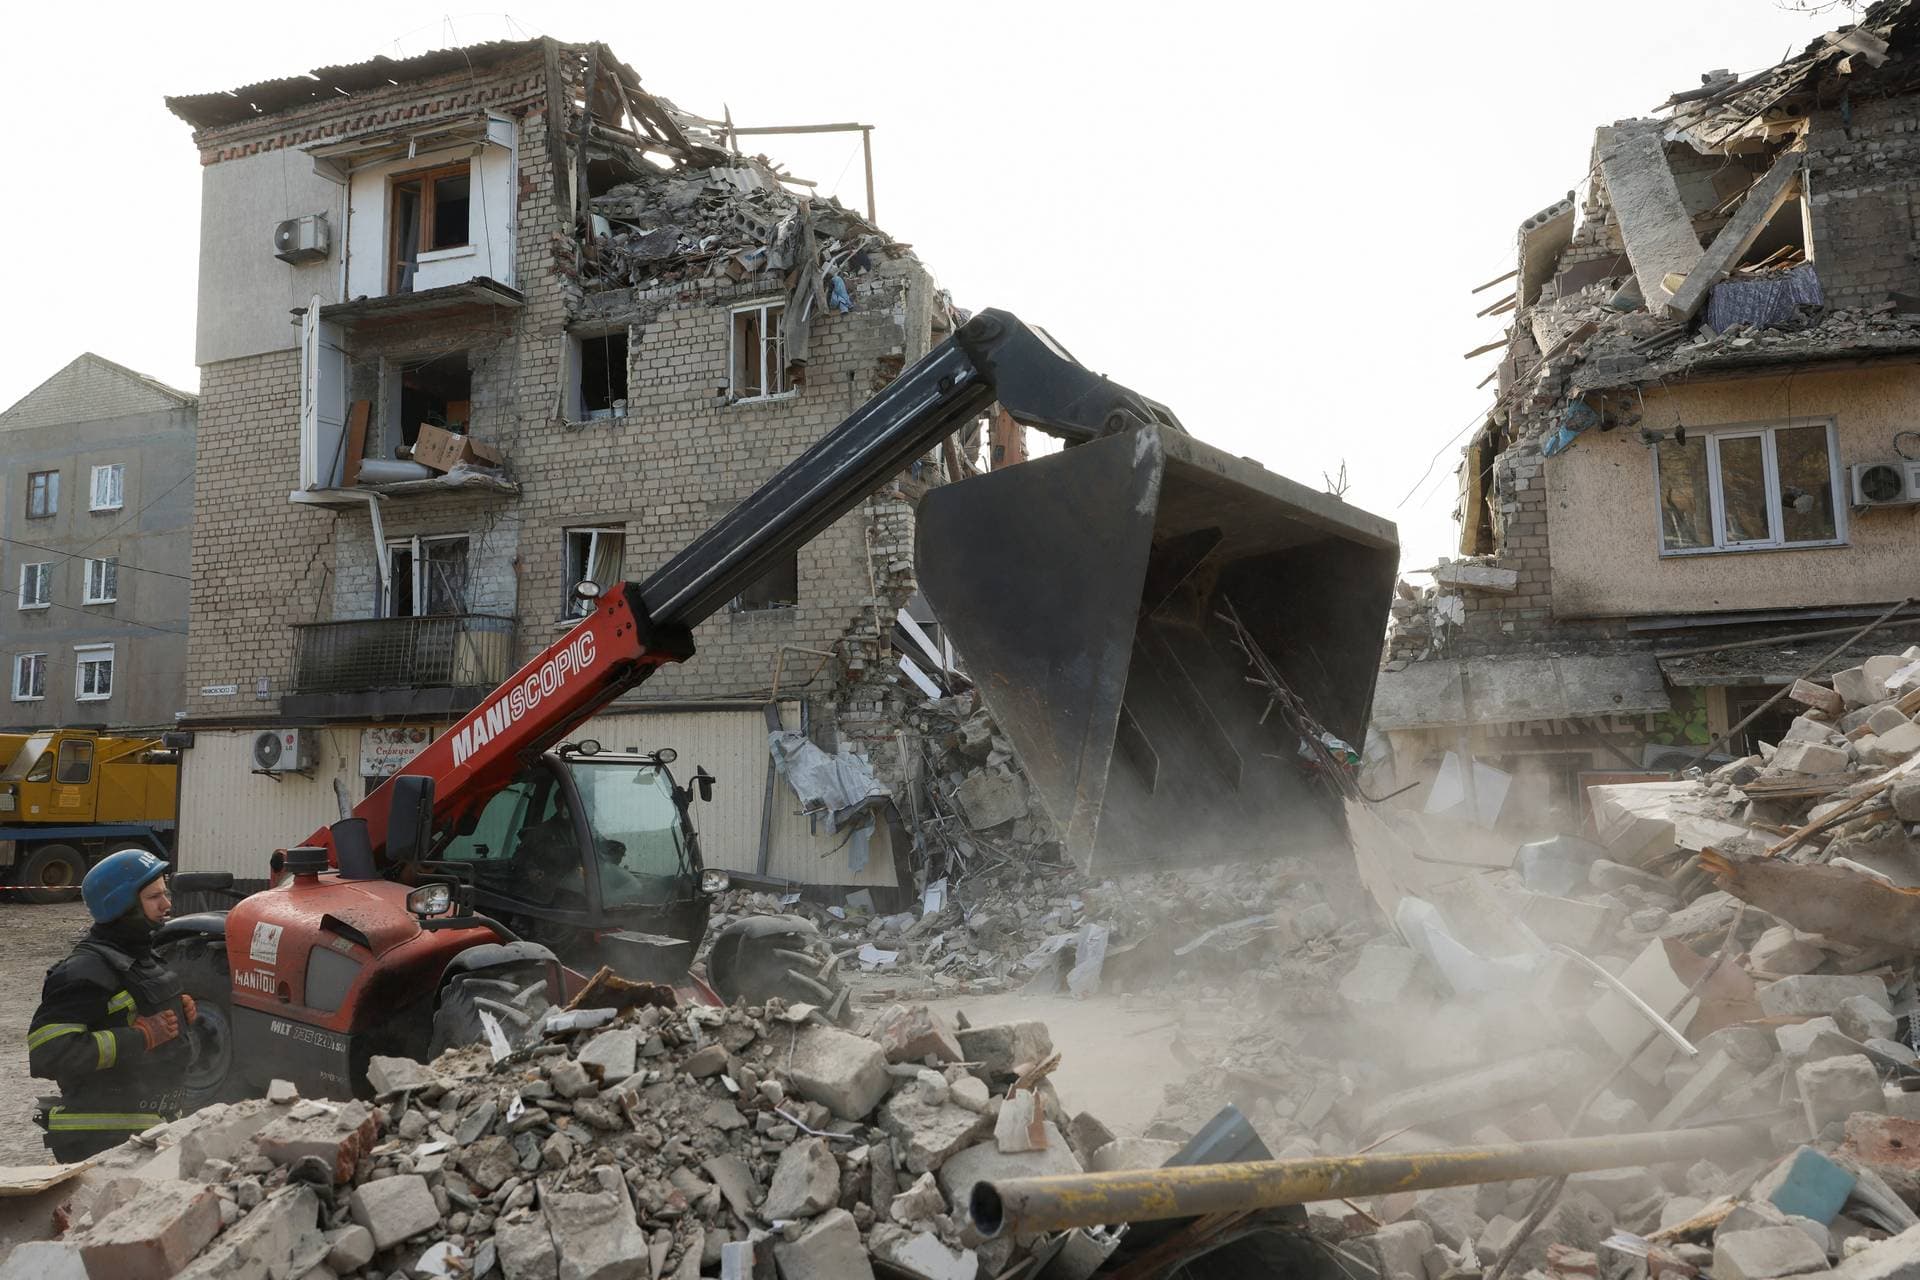 A rescuer works at the site of residential houses heavily damaged by a Russian missile strike in the town of Selydove